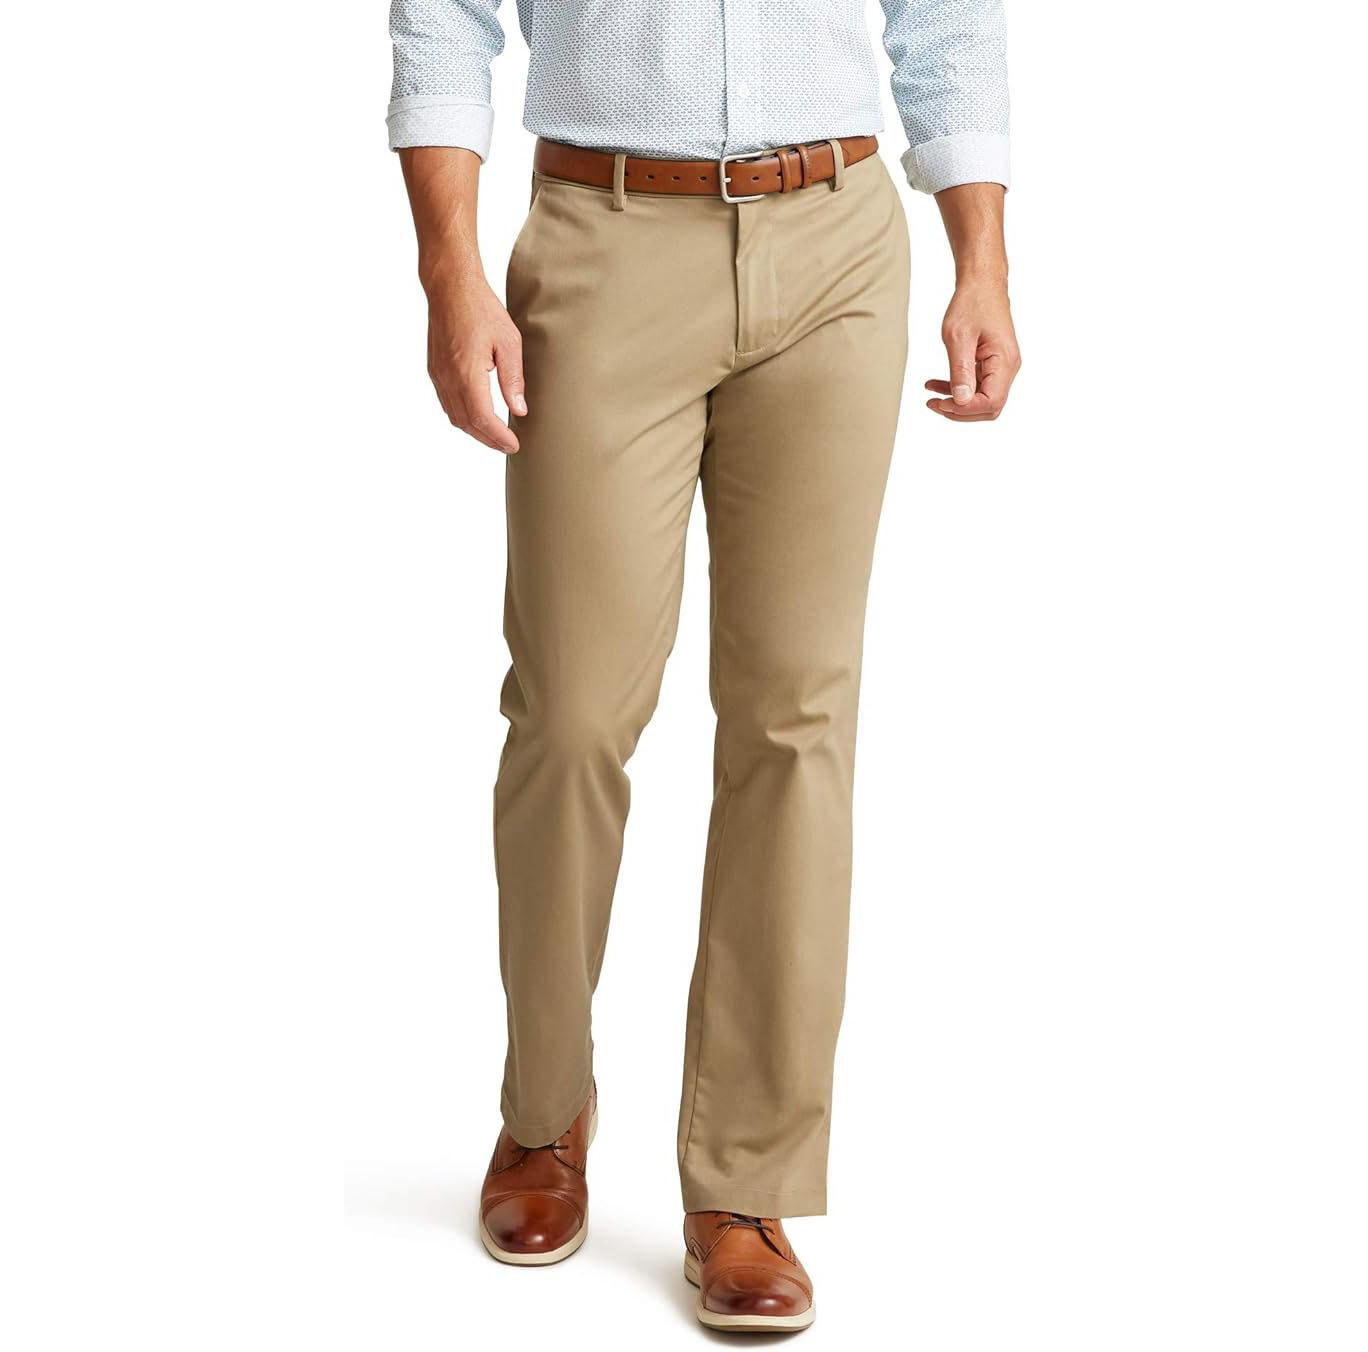 Dockers Straight Fit Signature Lux Cotton Stretch Khaki Pants for $14.99